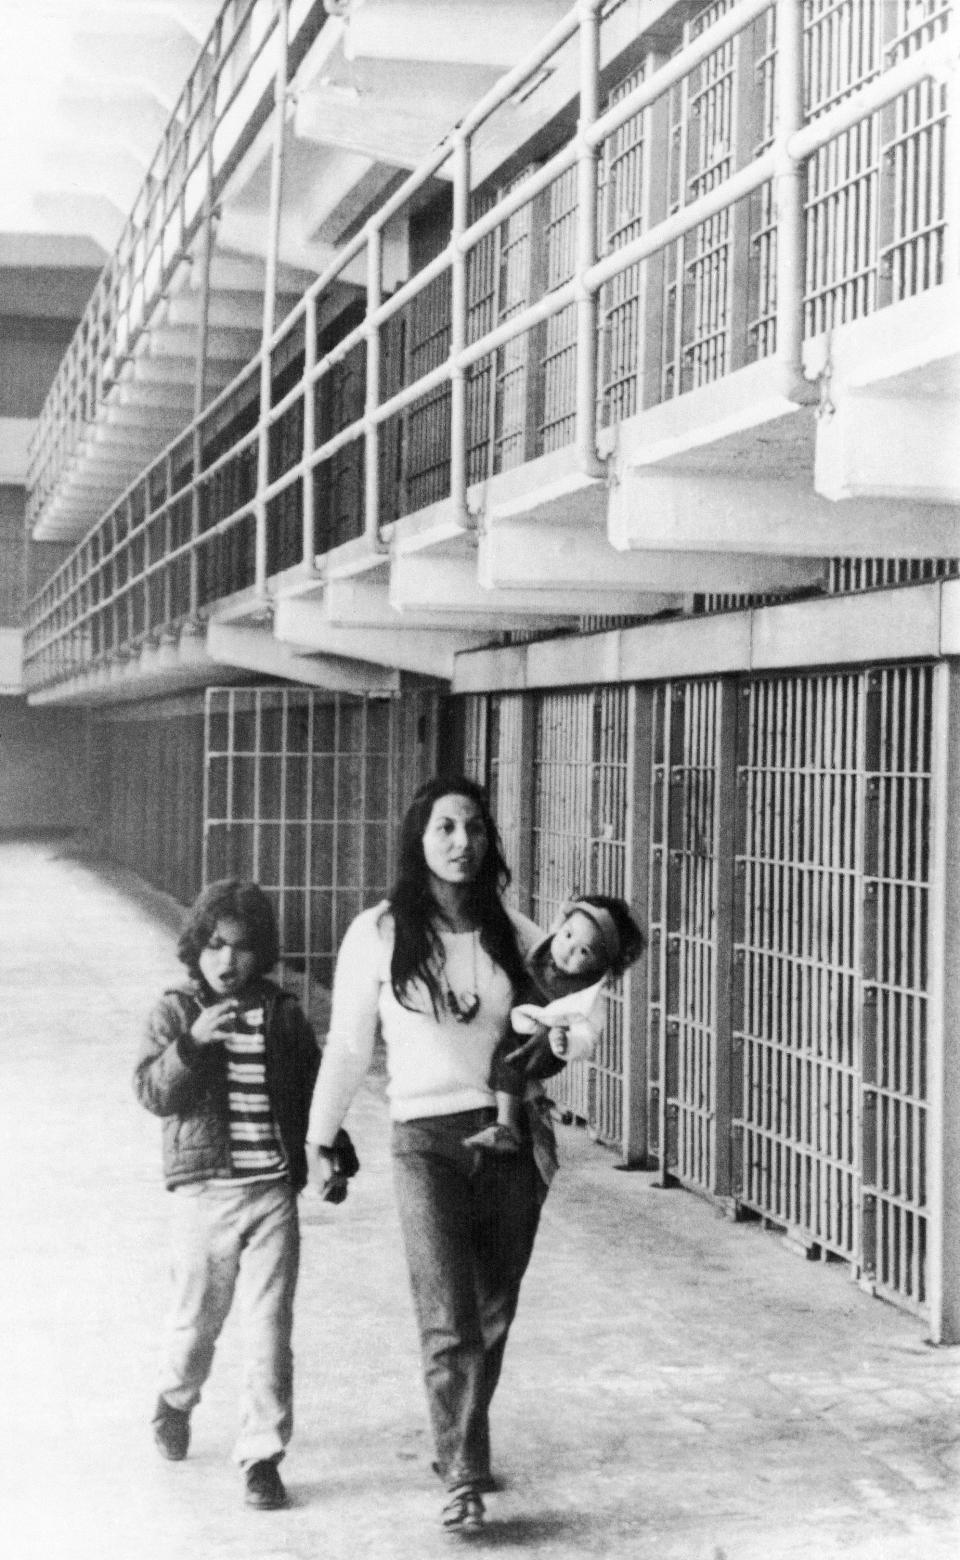 In this photo taken March 26, 1970, Eldy Bratt, 33, walks down the lonely corridor of a cell block on Alcatraz with her son Peter Bratt, left, and one of her daughters in San Francisco. The week of Nov. 18, 2019, marks 50 years since the beginning of a months-long Native American occupation at Alcatraz Island in the San Francisco Bay. The demonstration by dozens of tribal members had lasting effects for tribes, raising awareness of life on and off reservations, galvanizing activists and spurring a shift in federal policy toward self-determination. (AP Photo/Richard Drew, File)